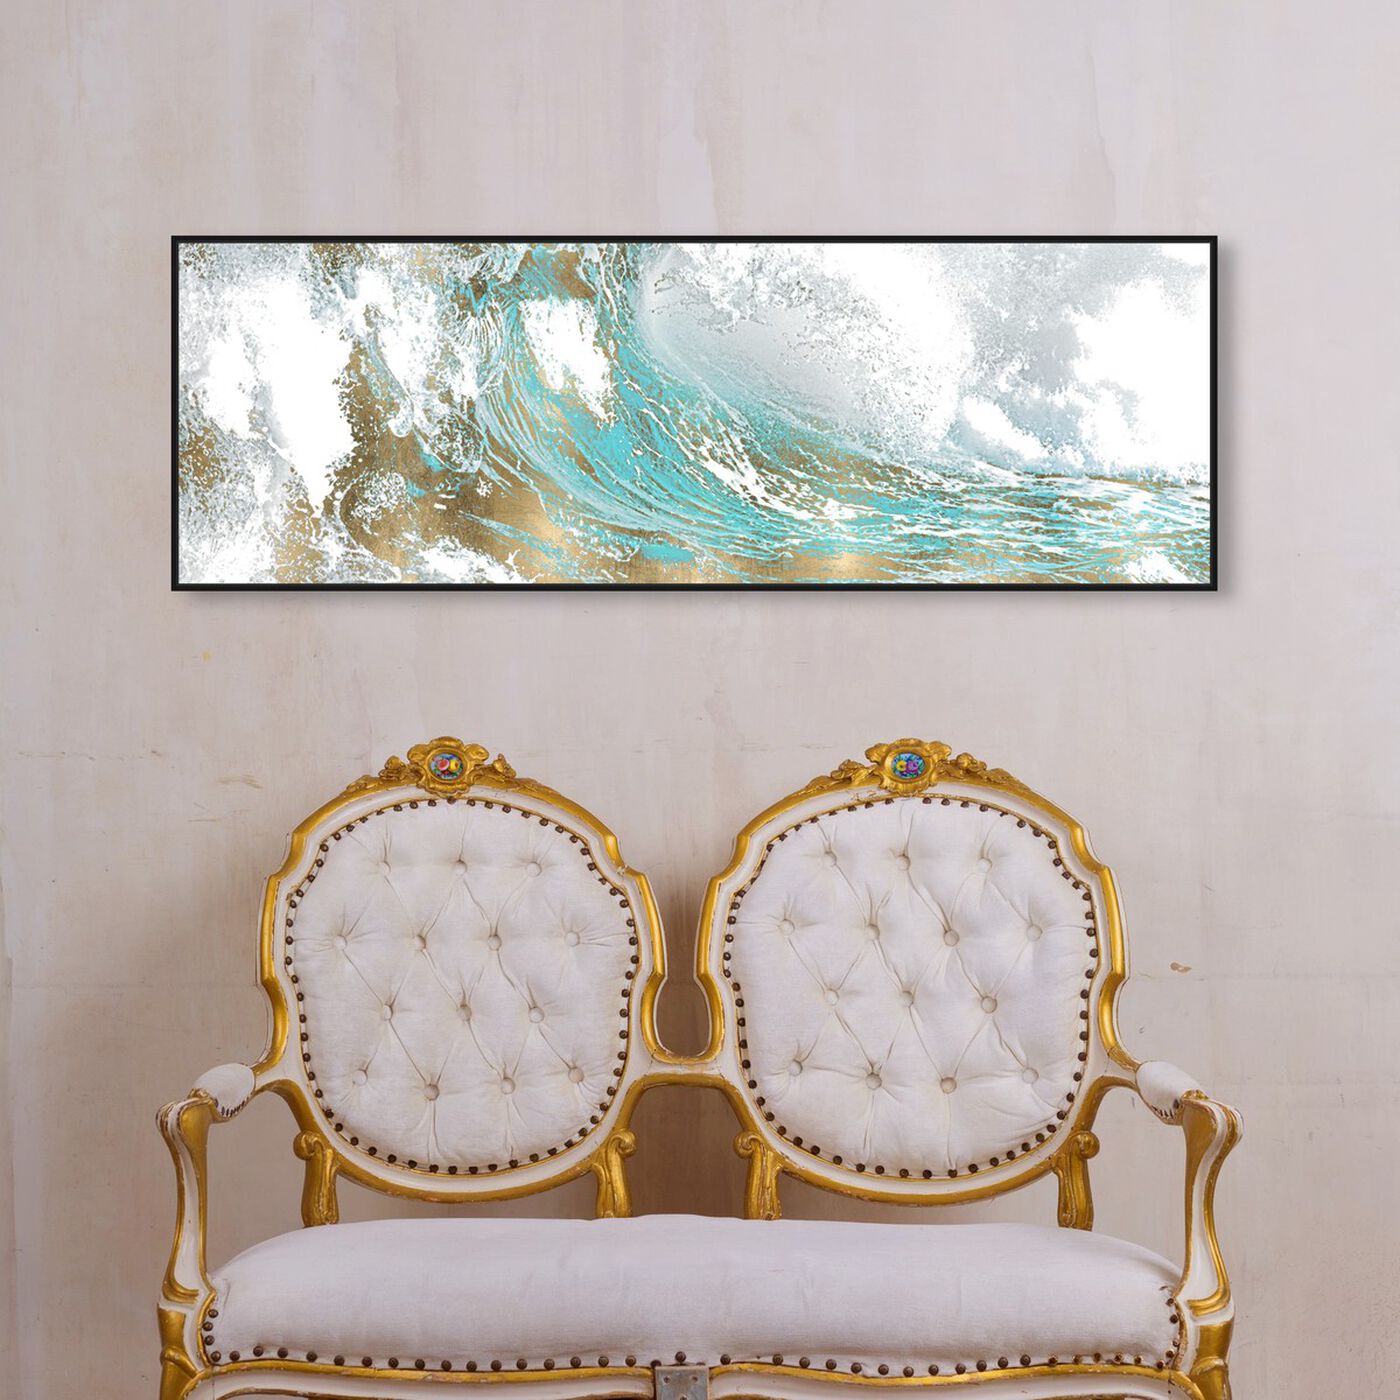 Oliver Gal, Wall Decor, One Remaining Restocked Oliver Gal Louis Vuitton  Ocean Waves